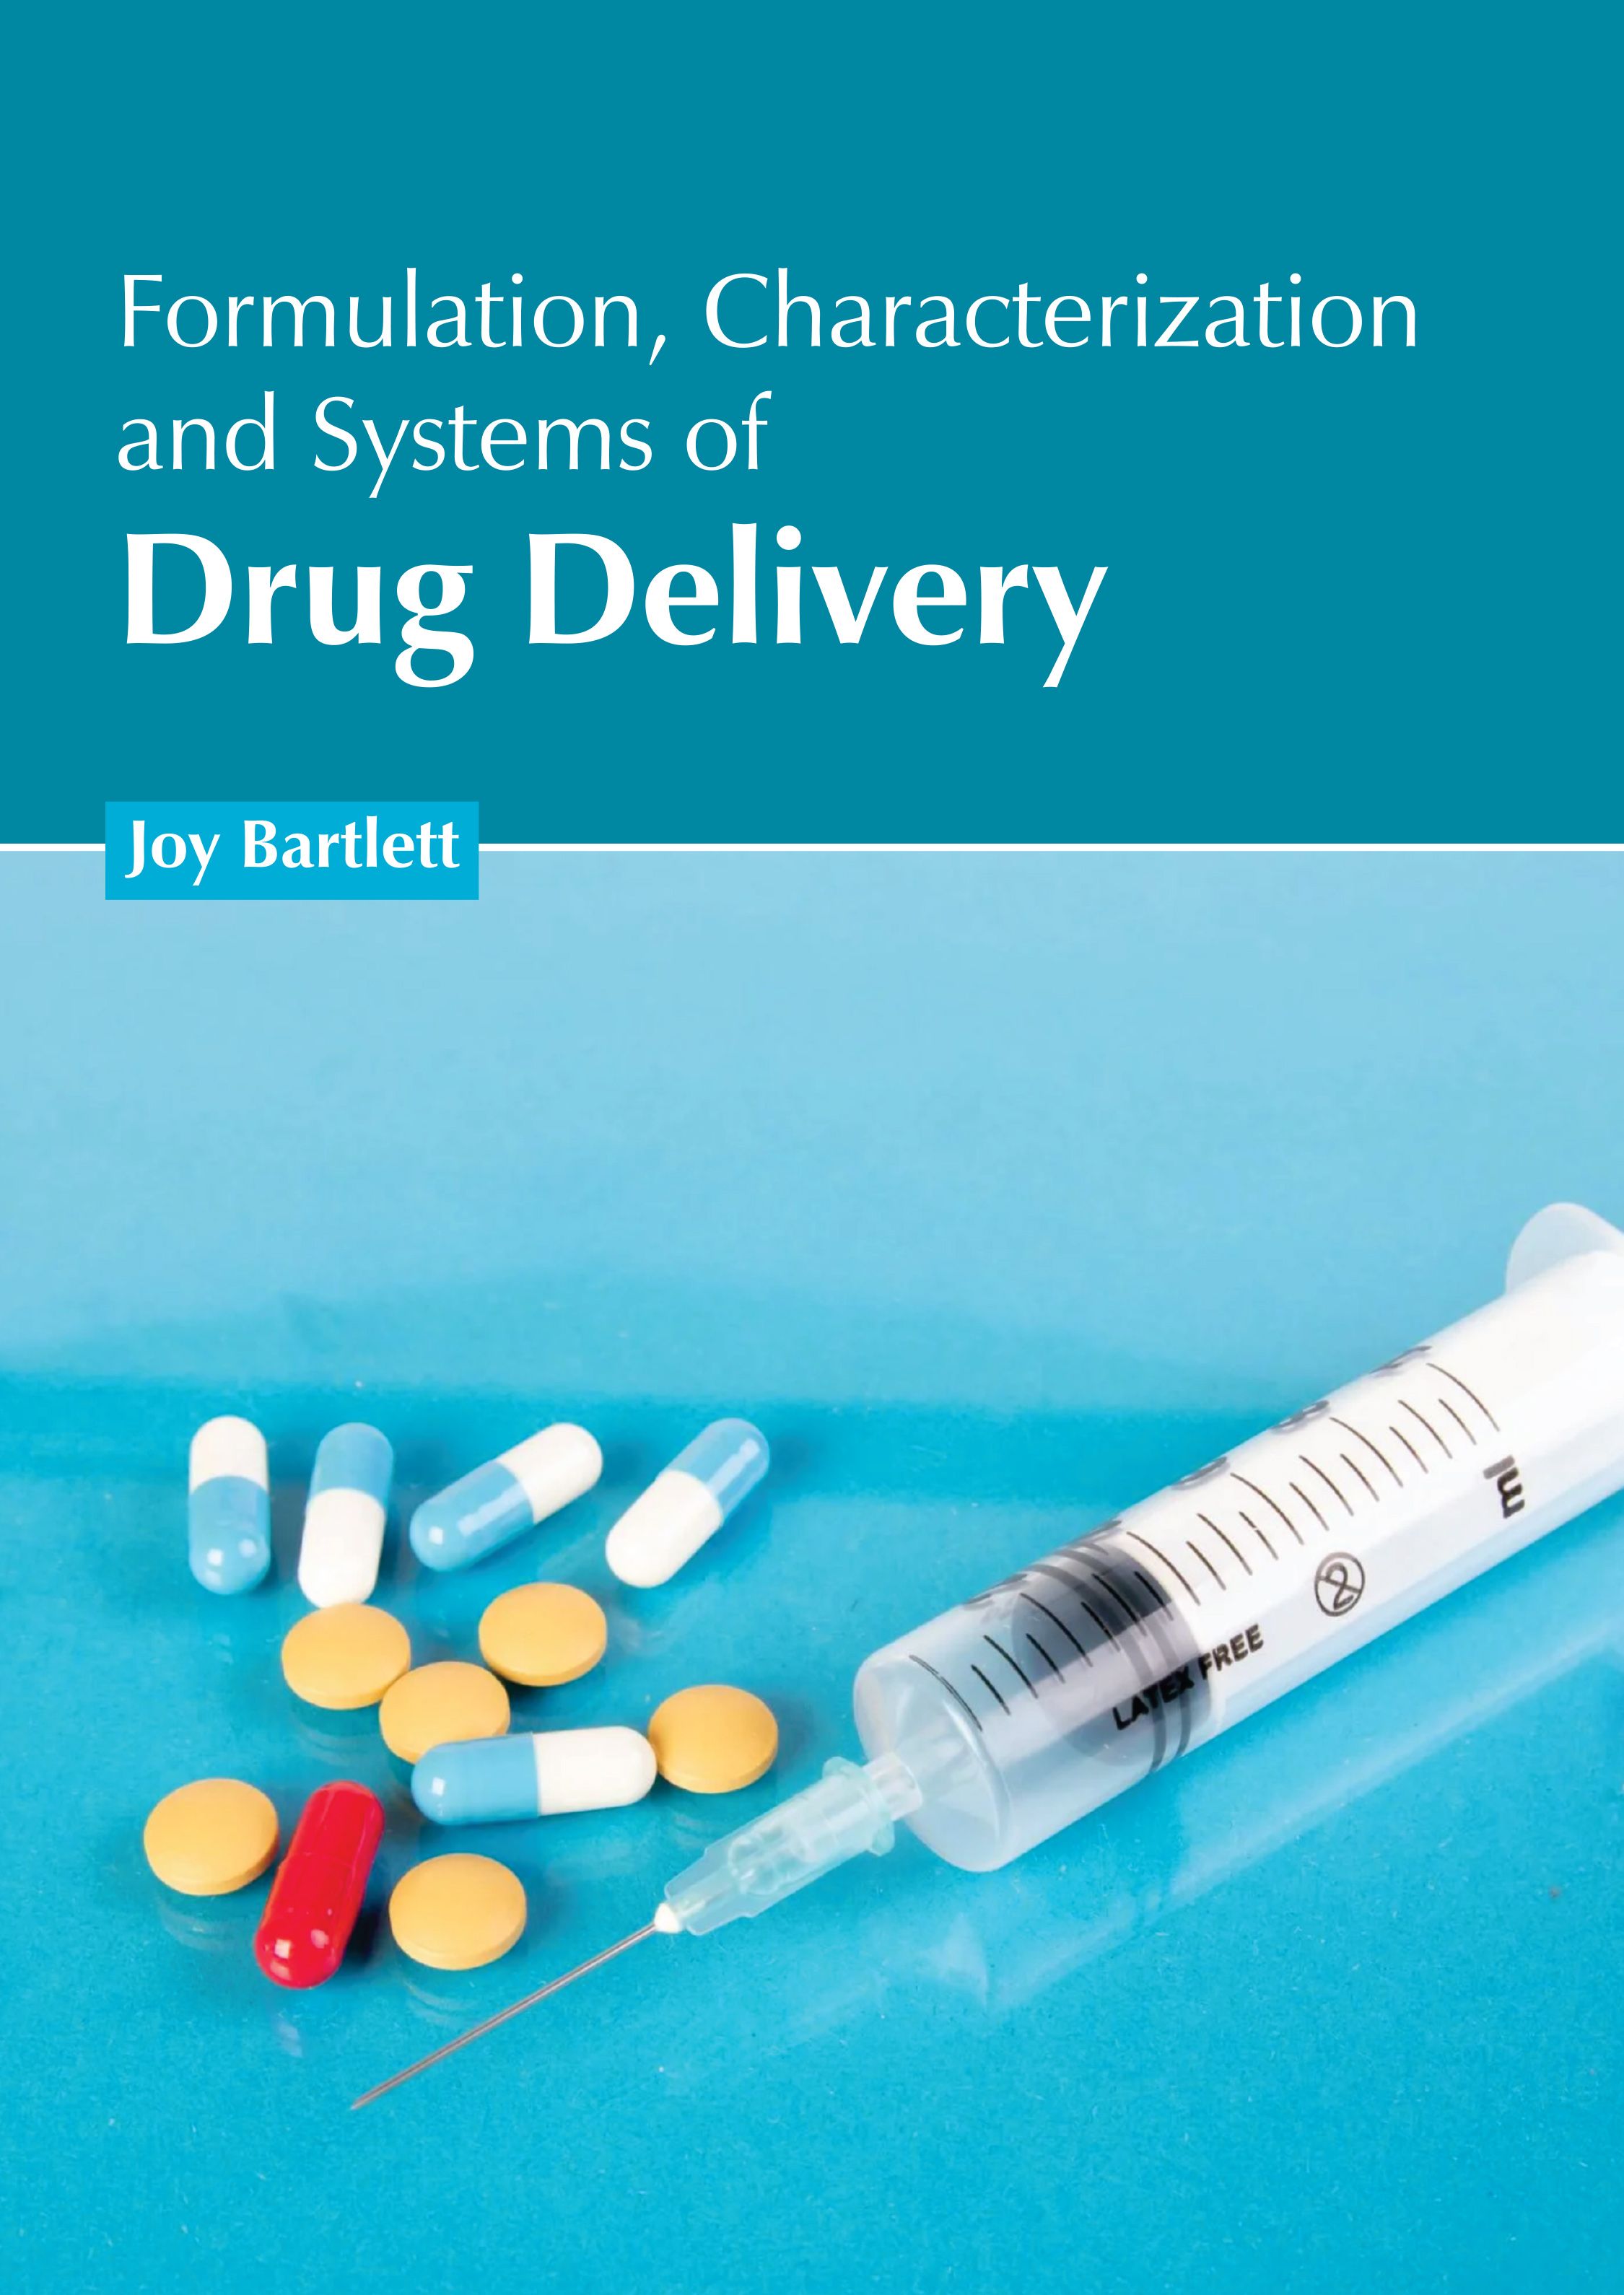 

medical-reference-books/pharmacology/handbook-of-anticancer-drug-discovery-and-development-9798887400723